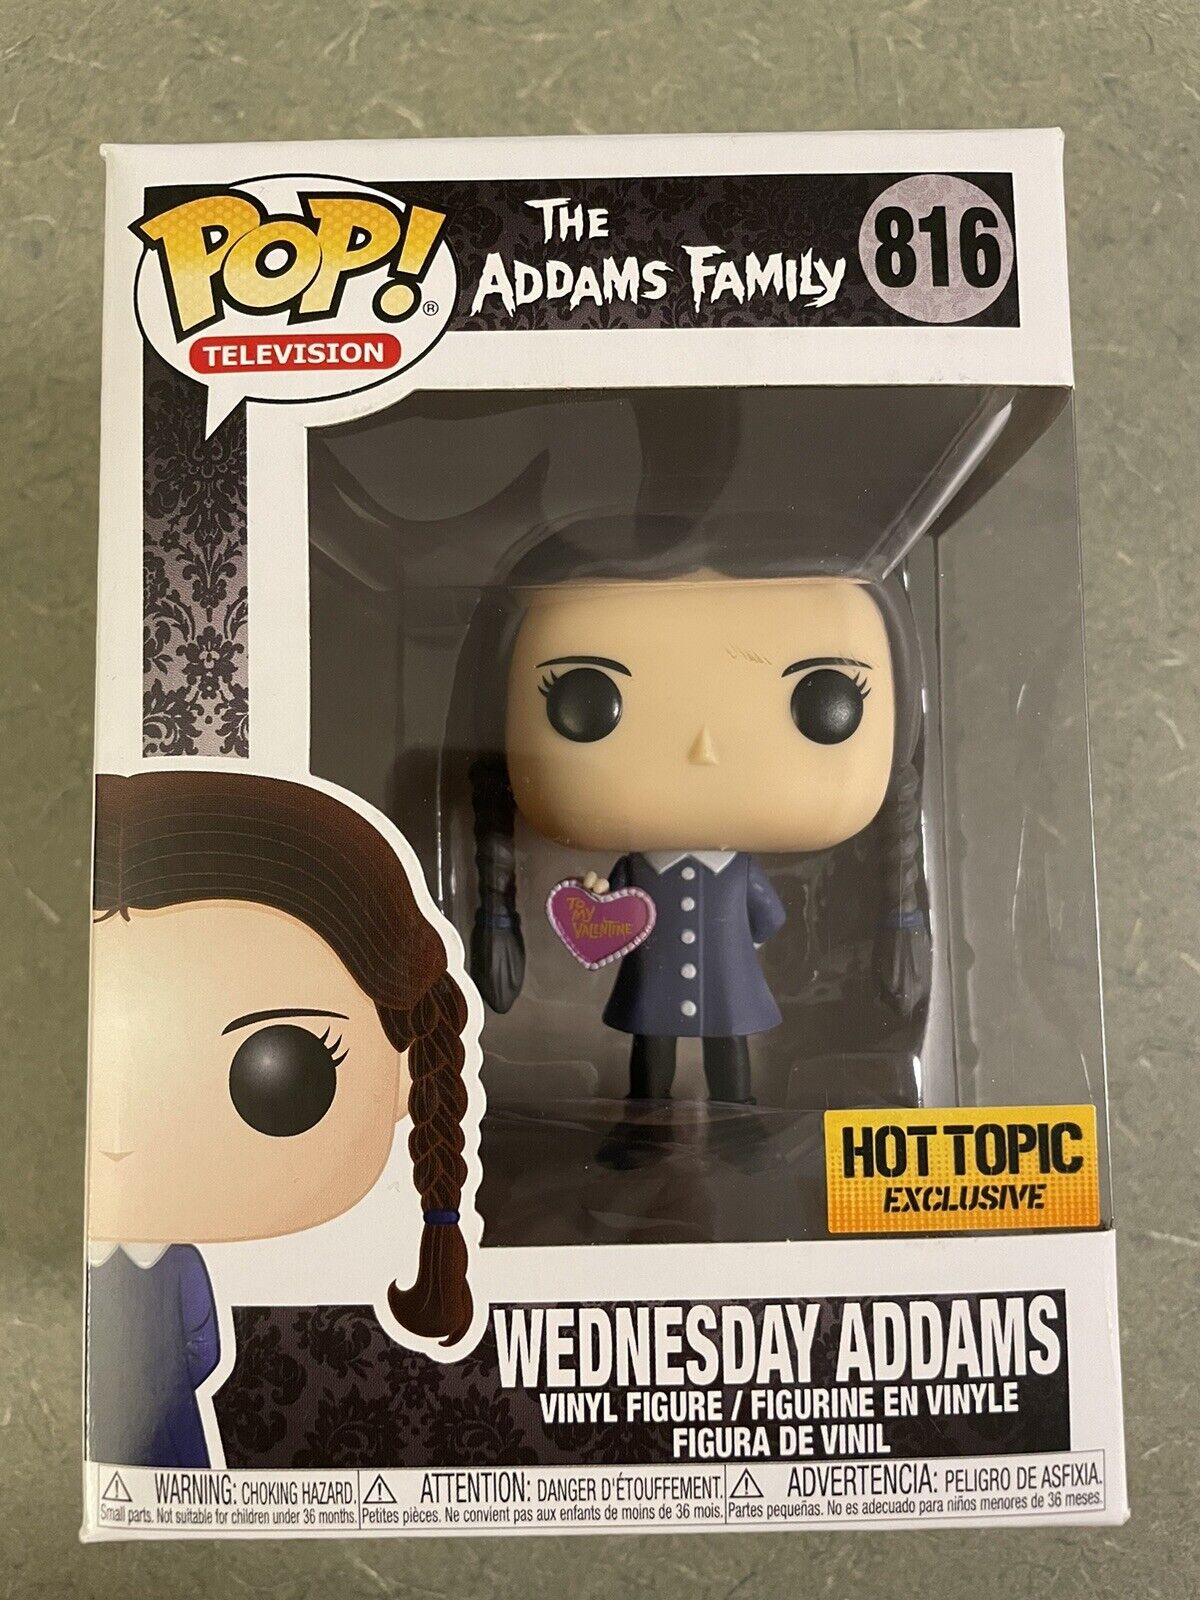 The Addams Family #816 Wednesday Addams Hot Topic Exclusive Funko Pop